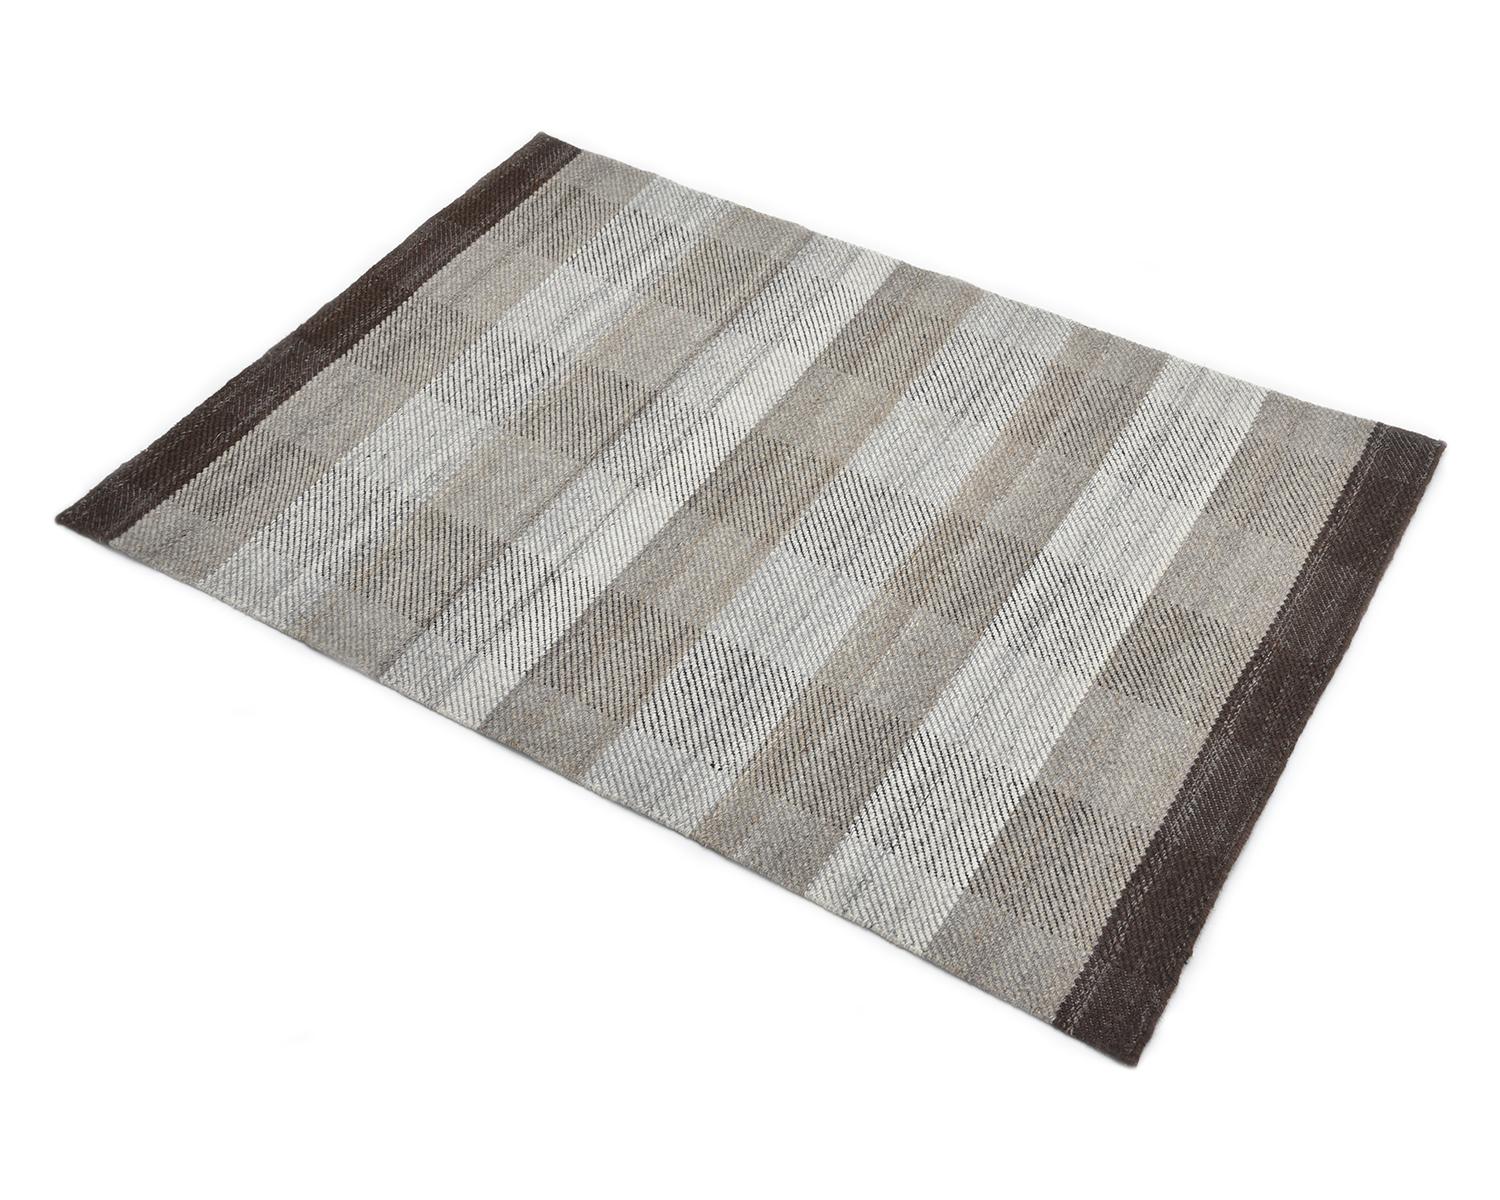 Solo Rugs Flatweave Checkered Hand Woven Brown Area Rug For Sale 1